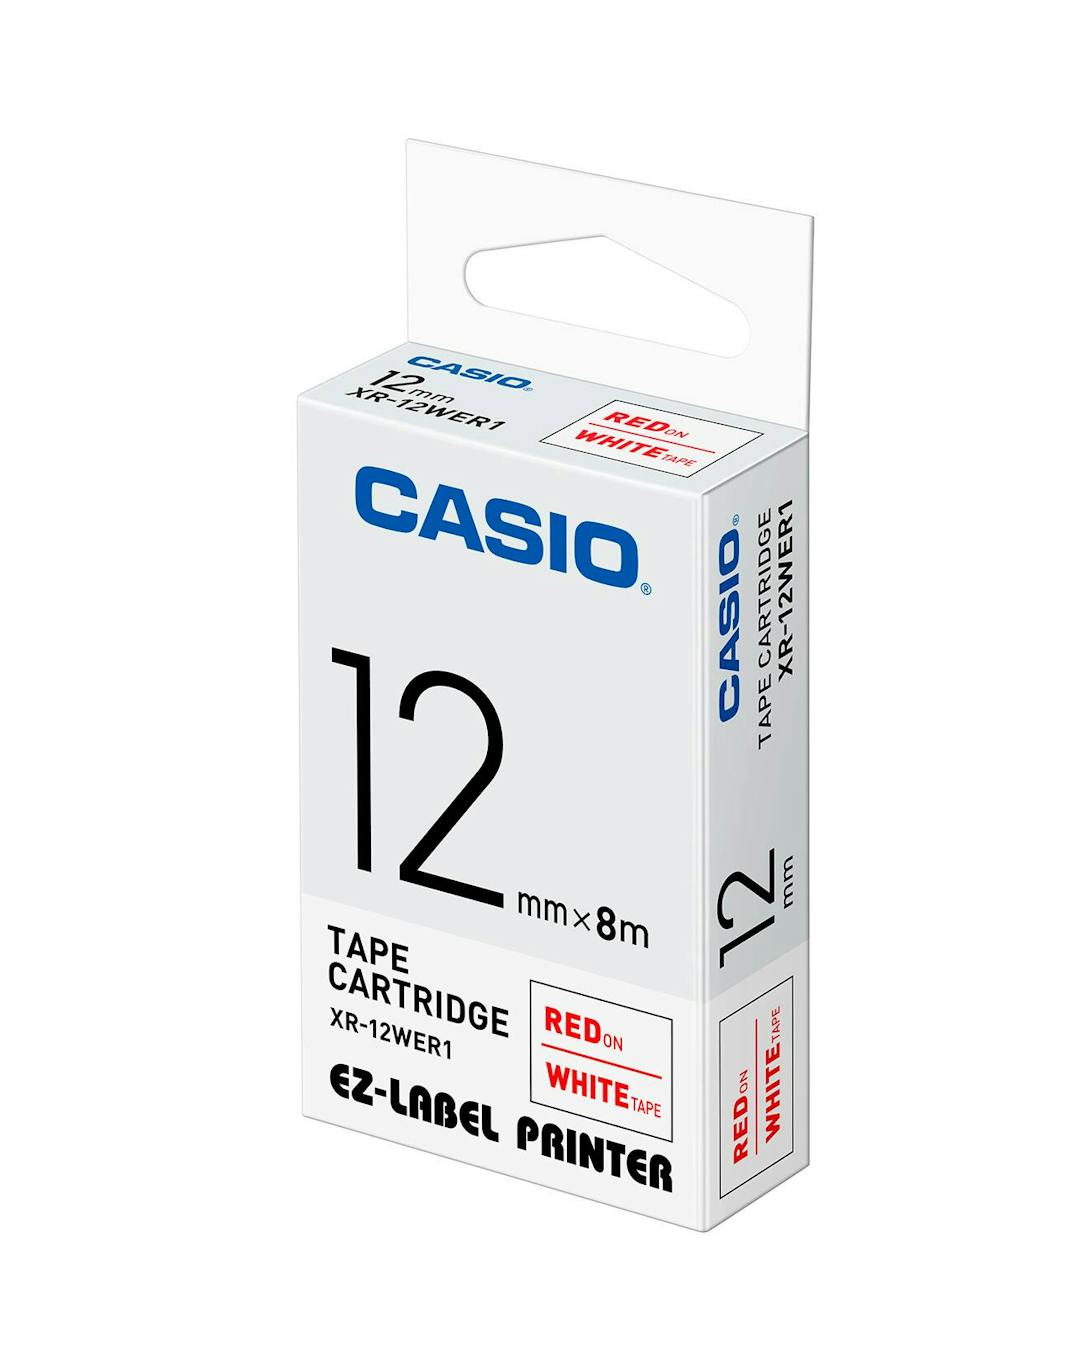 Casio Tape Labeler Cartridge XR-12WER1 | Red on White